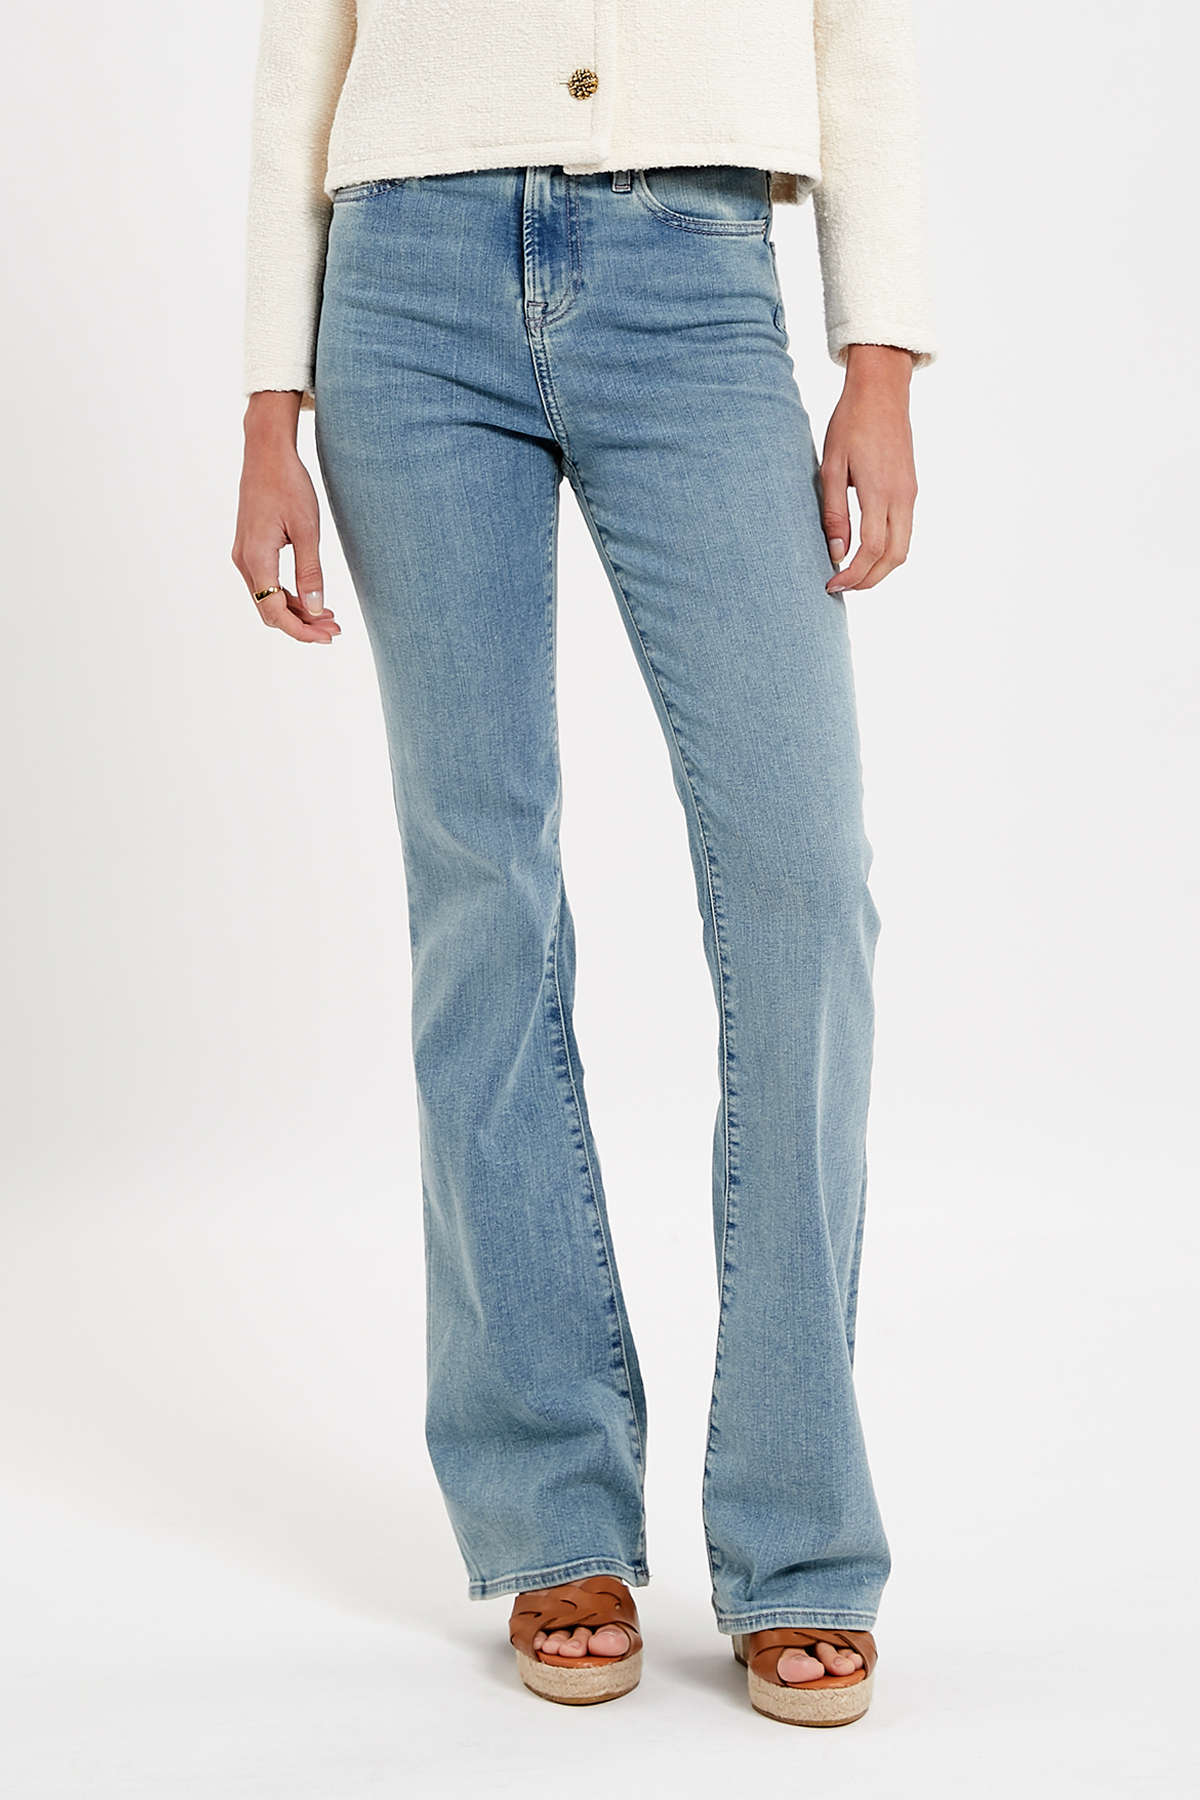 High-Rise Jeans Patty